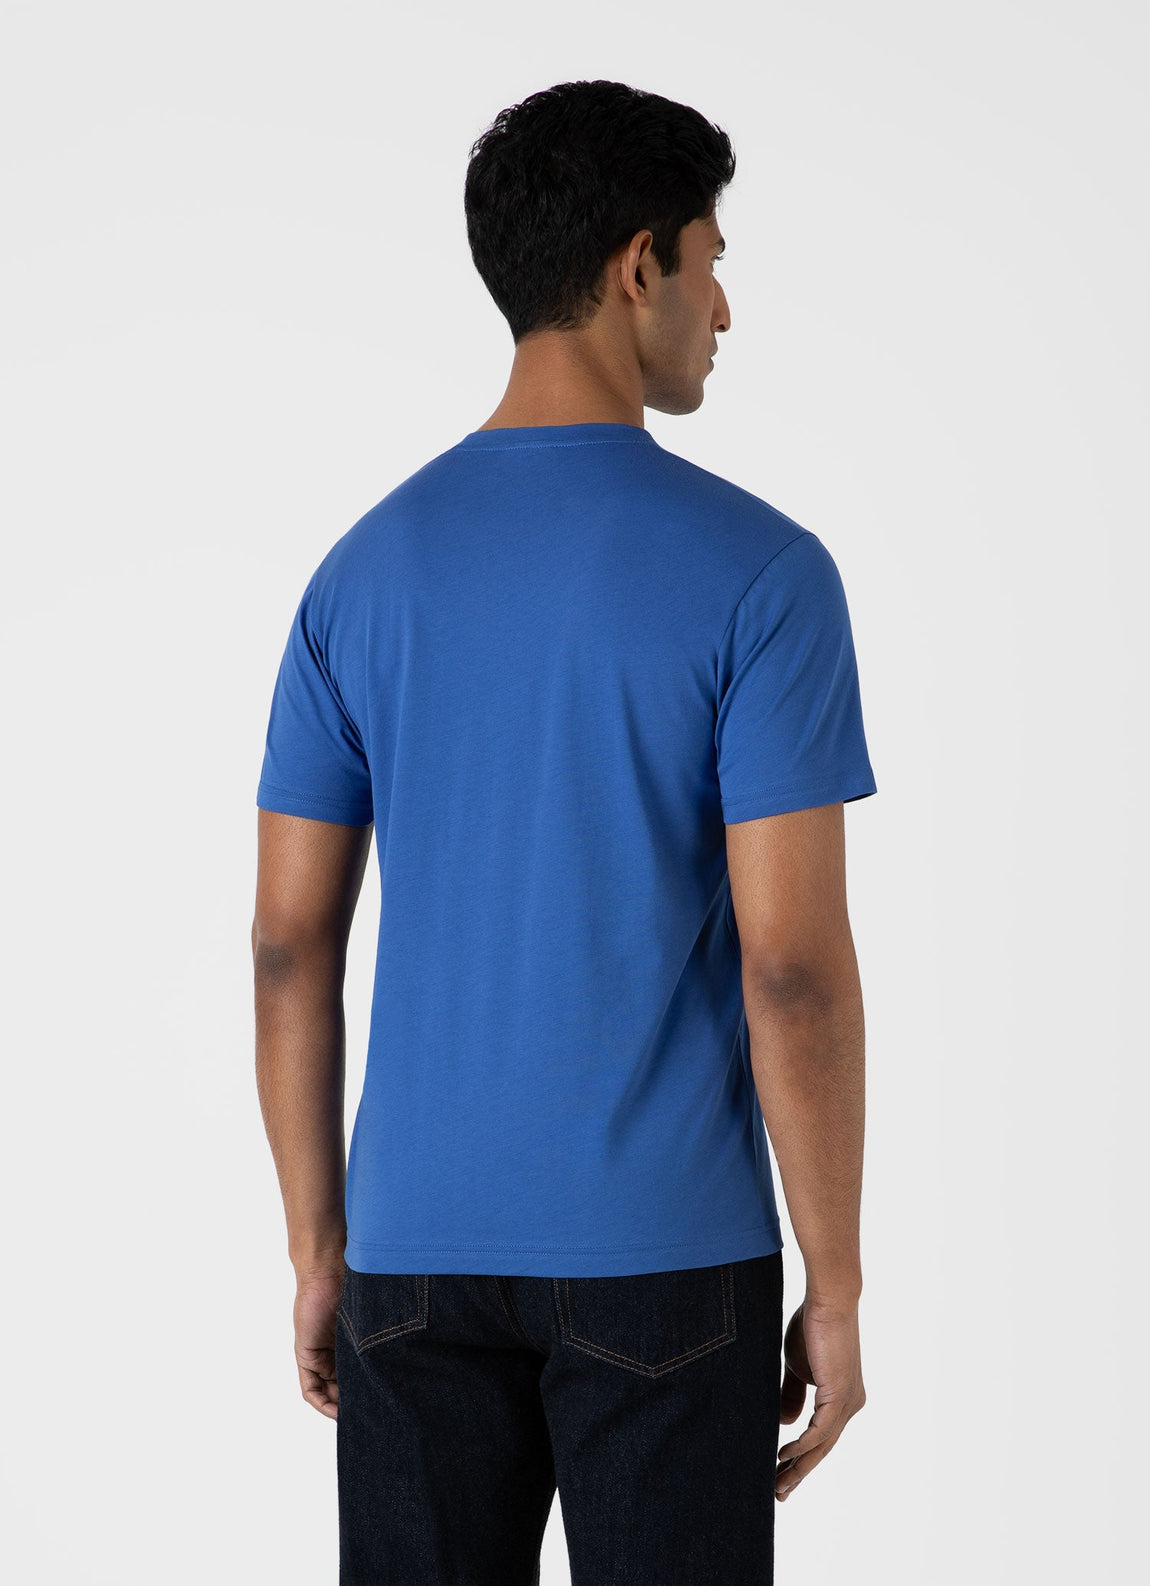 Men's Riviera Midweight T-shirt in French Blue